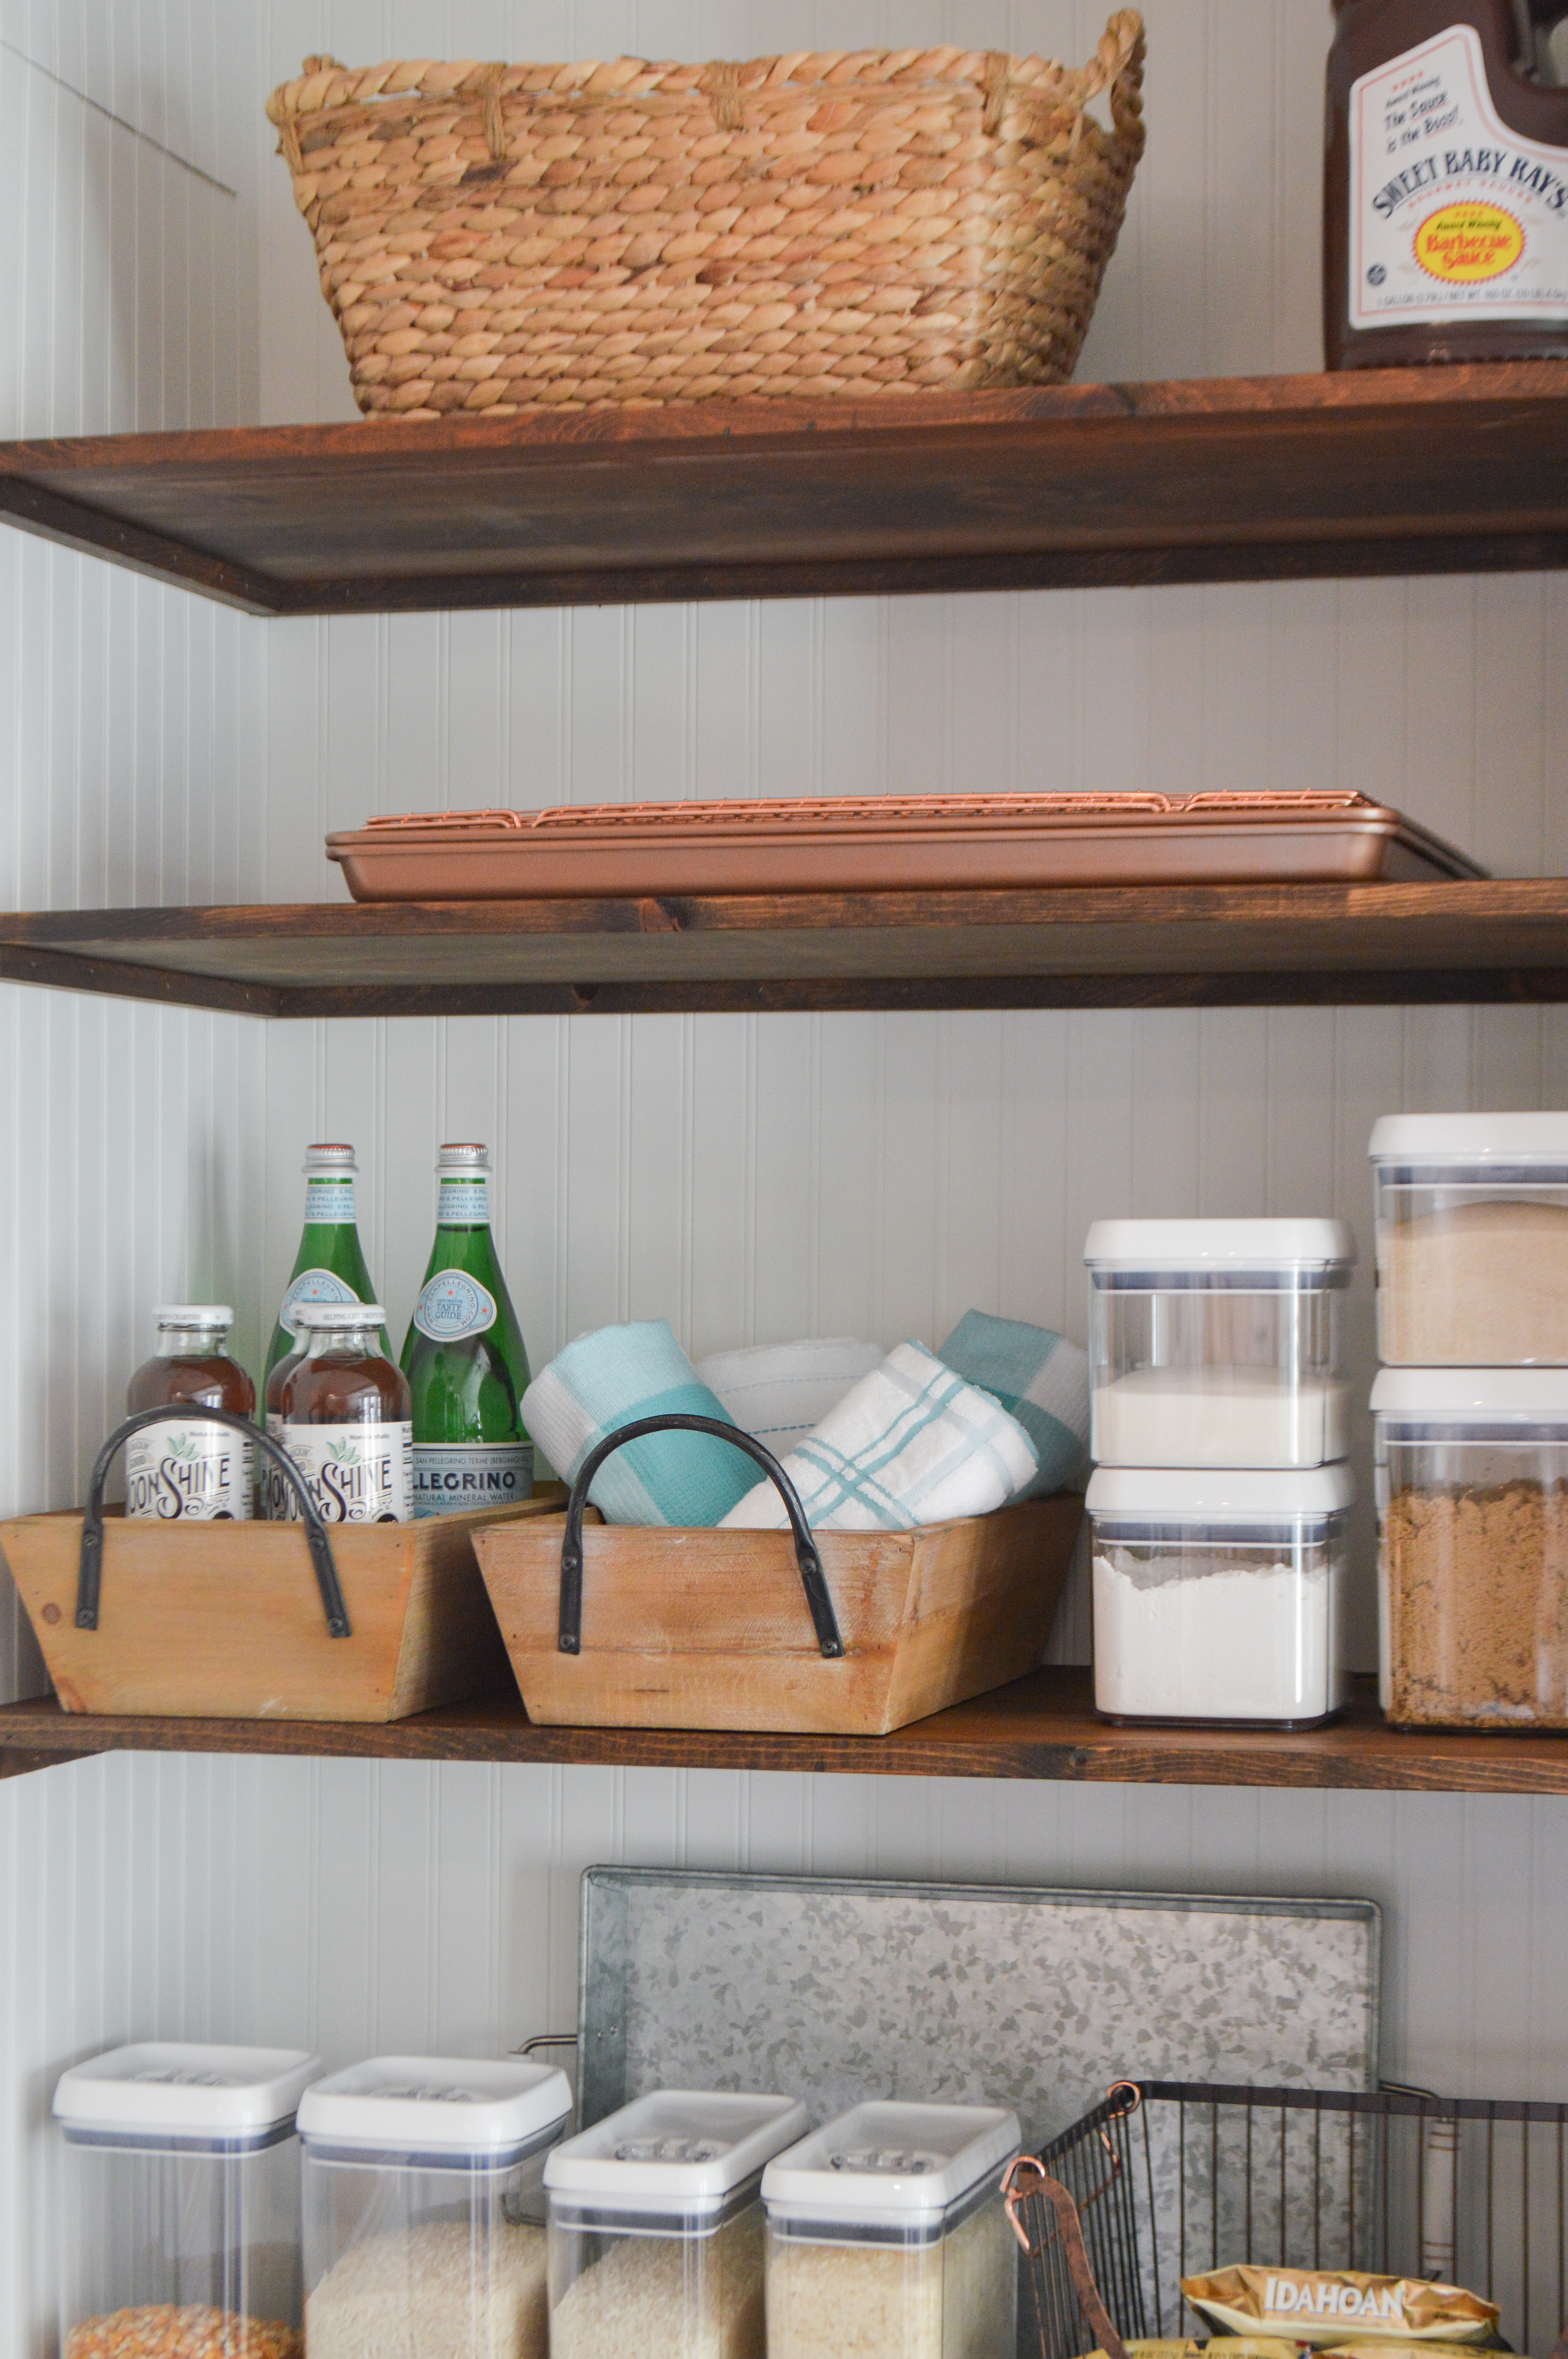 11 Ways You Can Make Open Shelving Work in Your Pantry